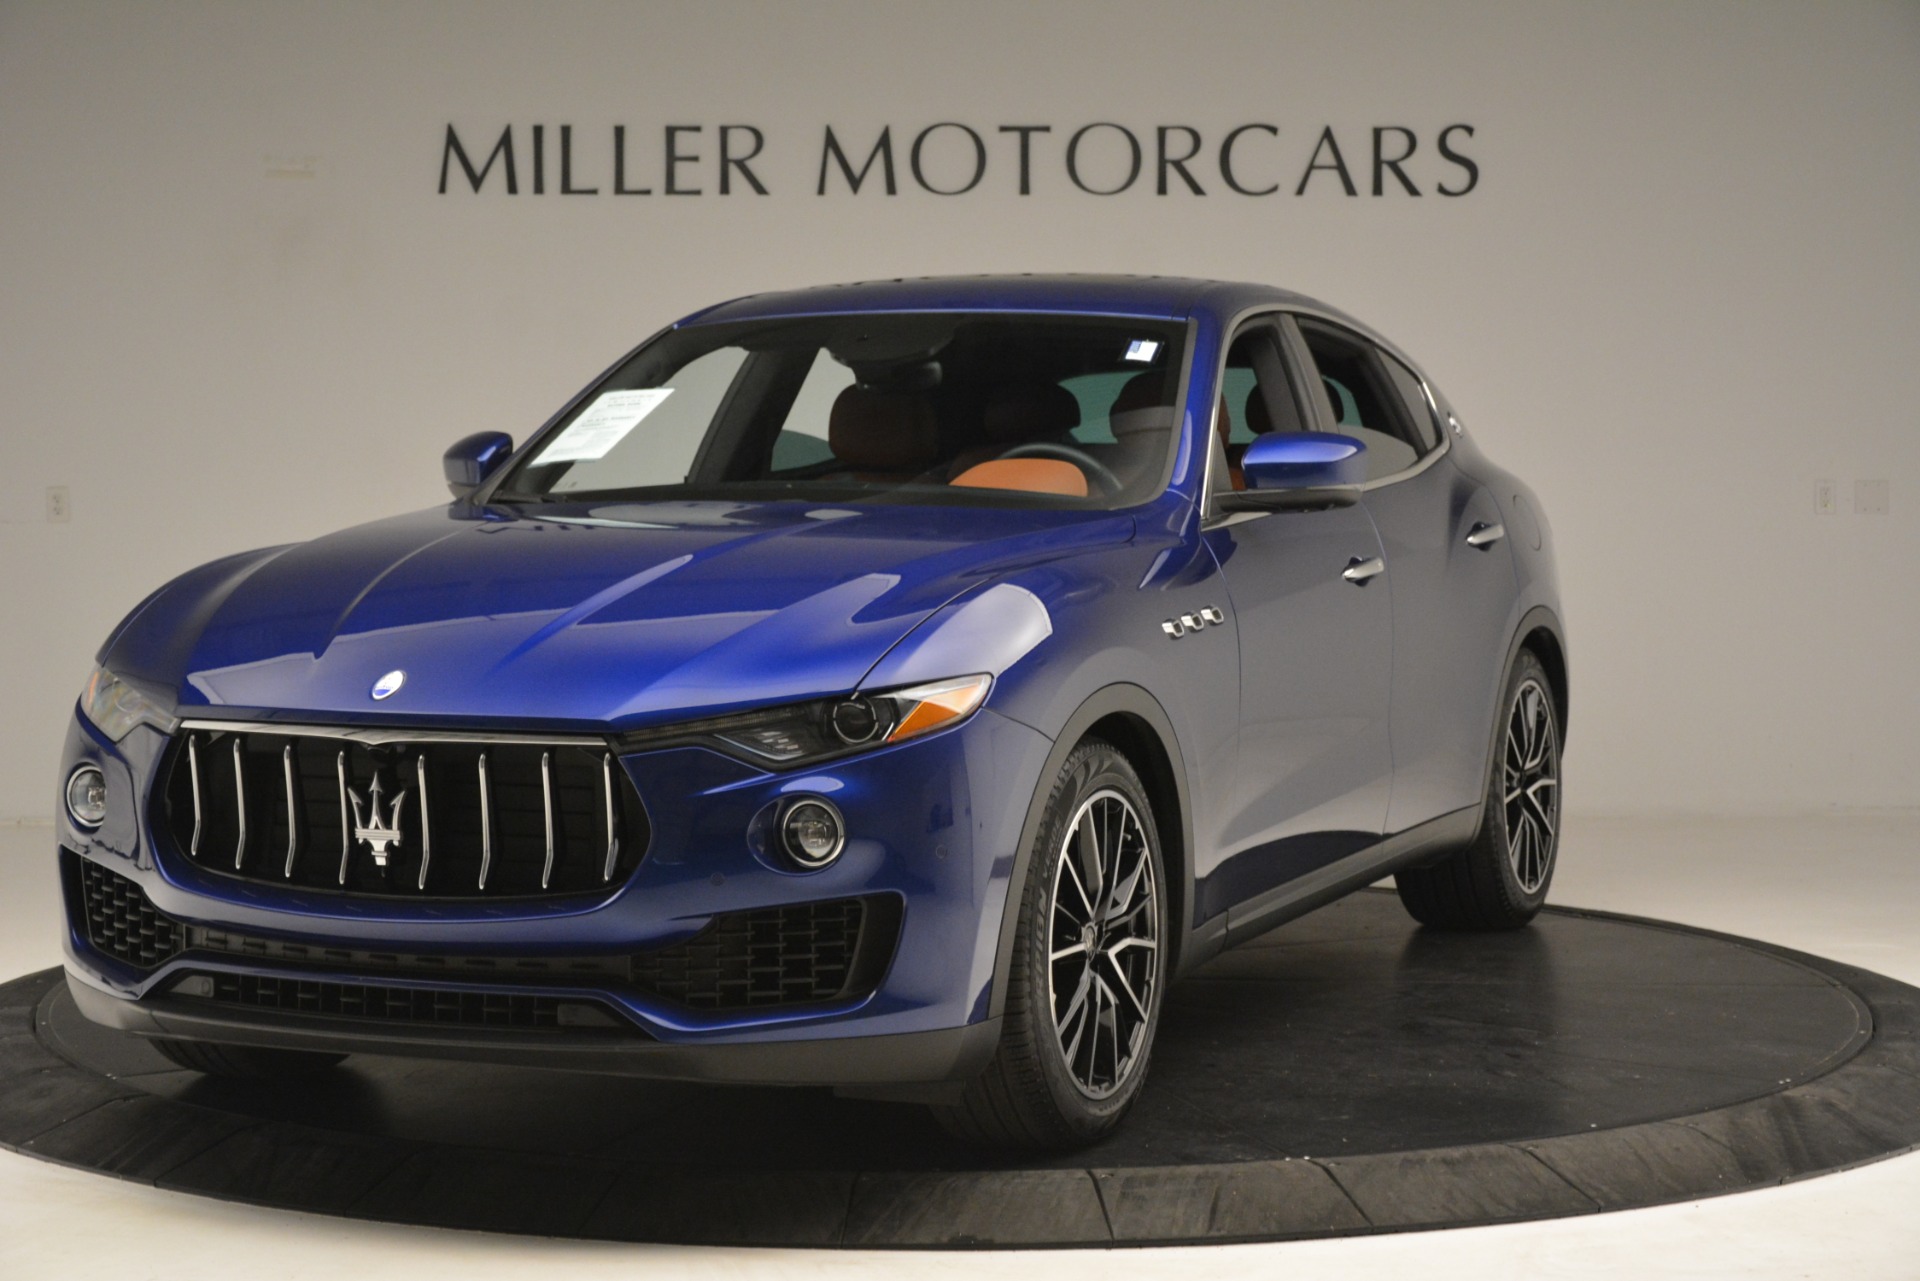 Used 2018 Maserati Levante Q4 for sale Sold at Bentley Greenwich in Greenwich CT 06830 1